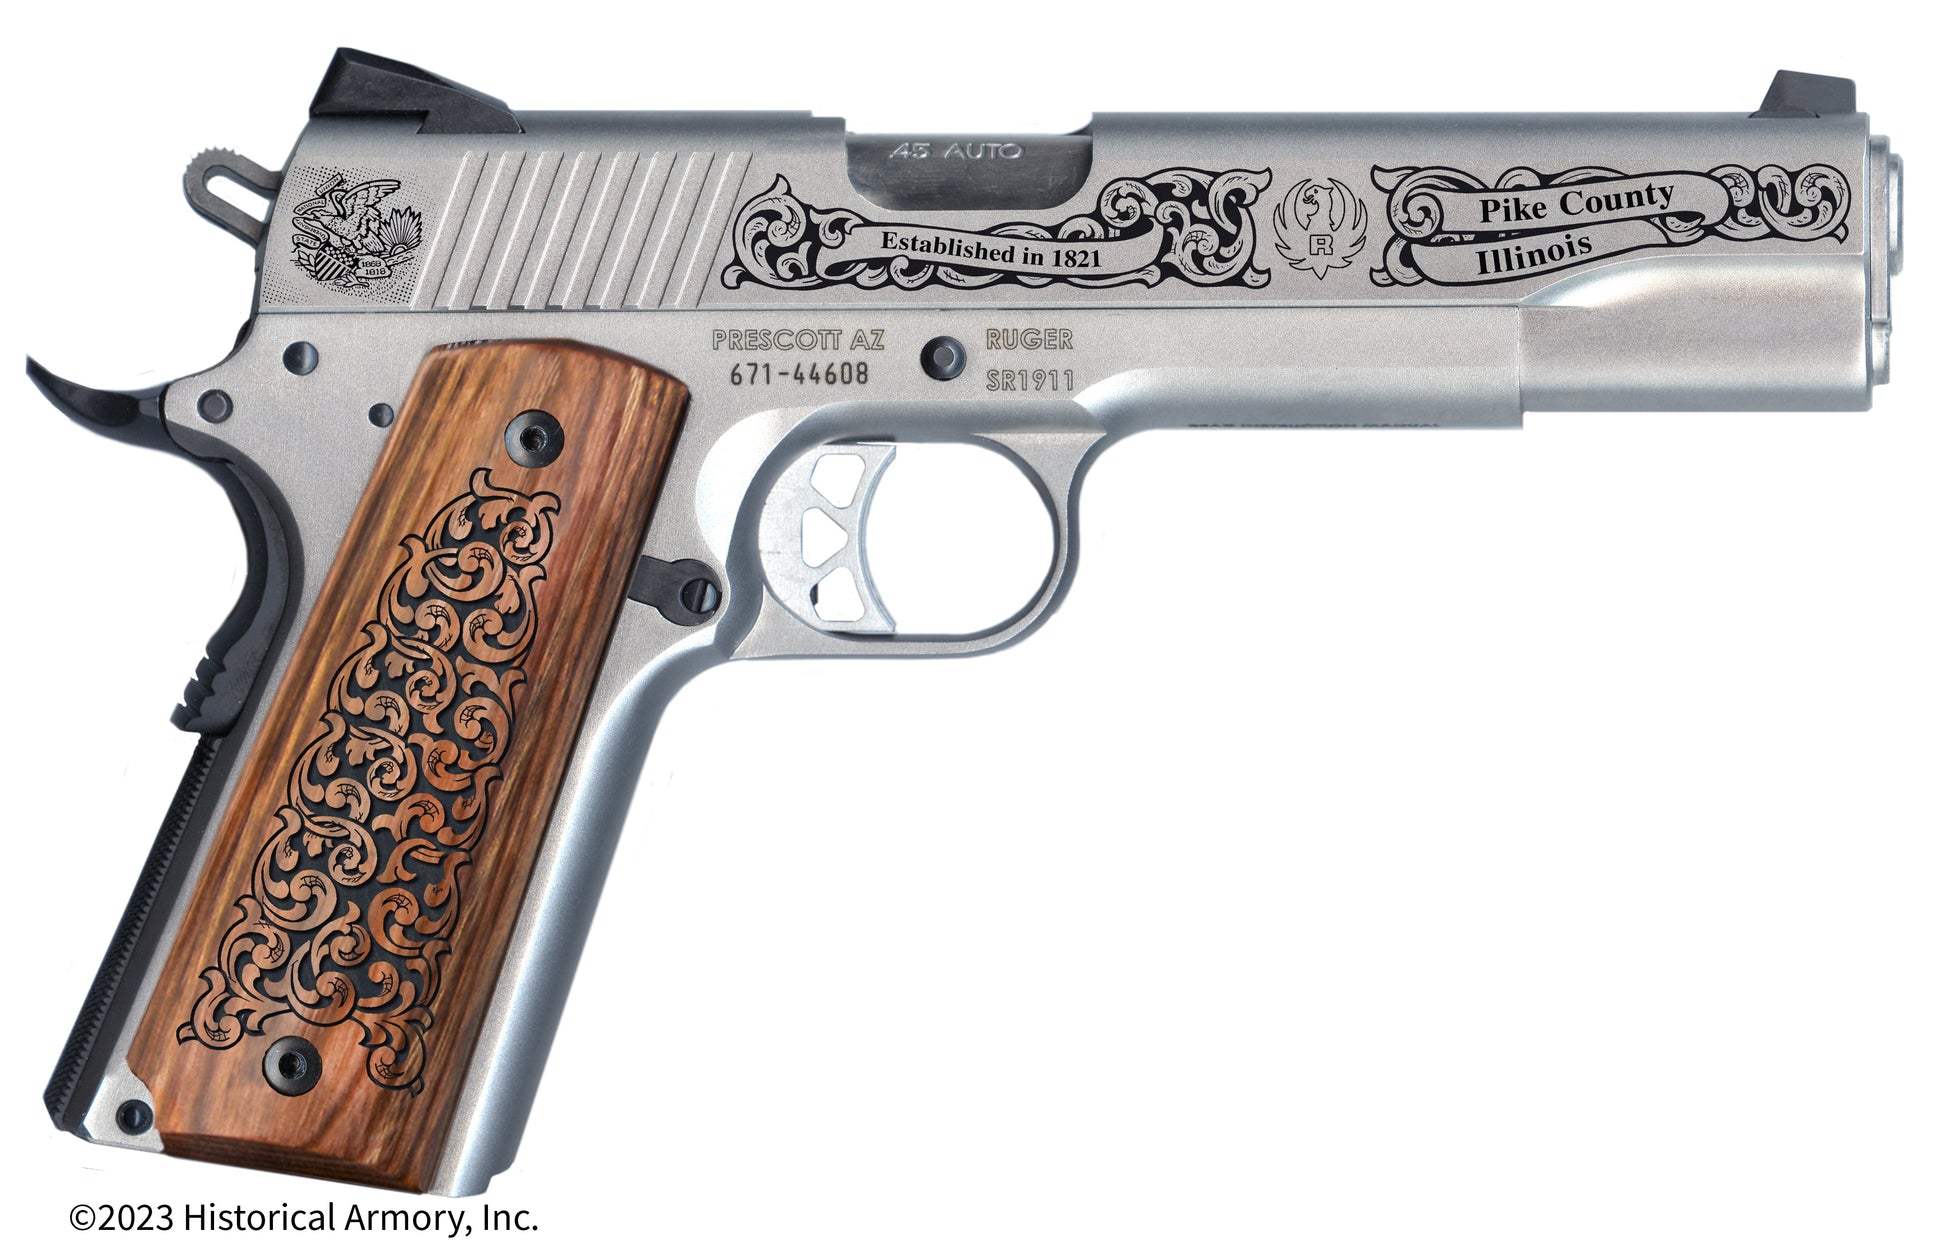 Pike County Illinois Engraved .45 Auto Ruger 1911